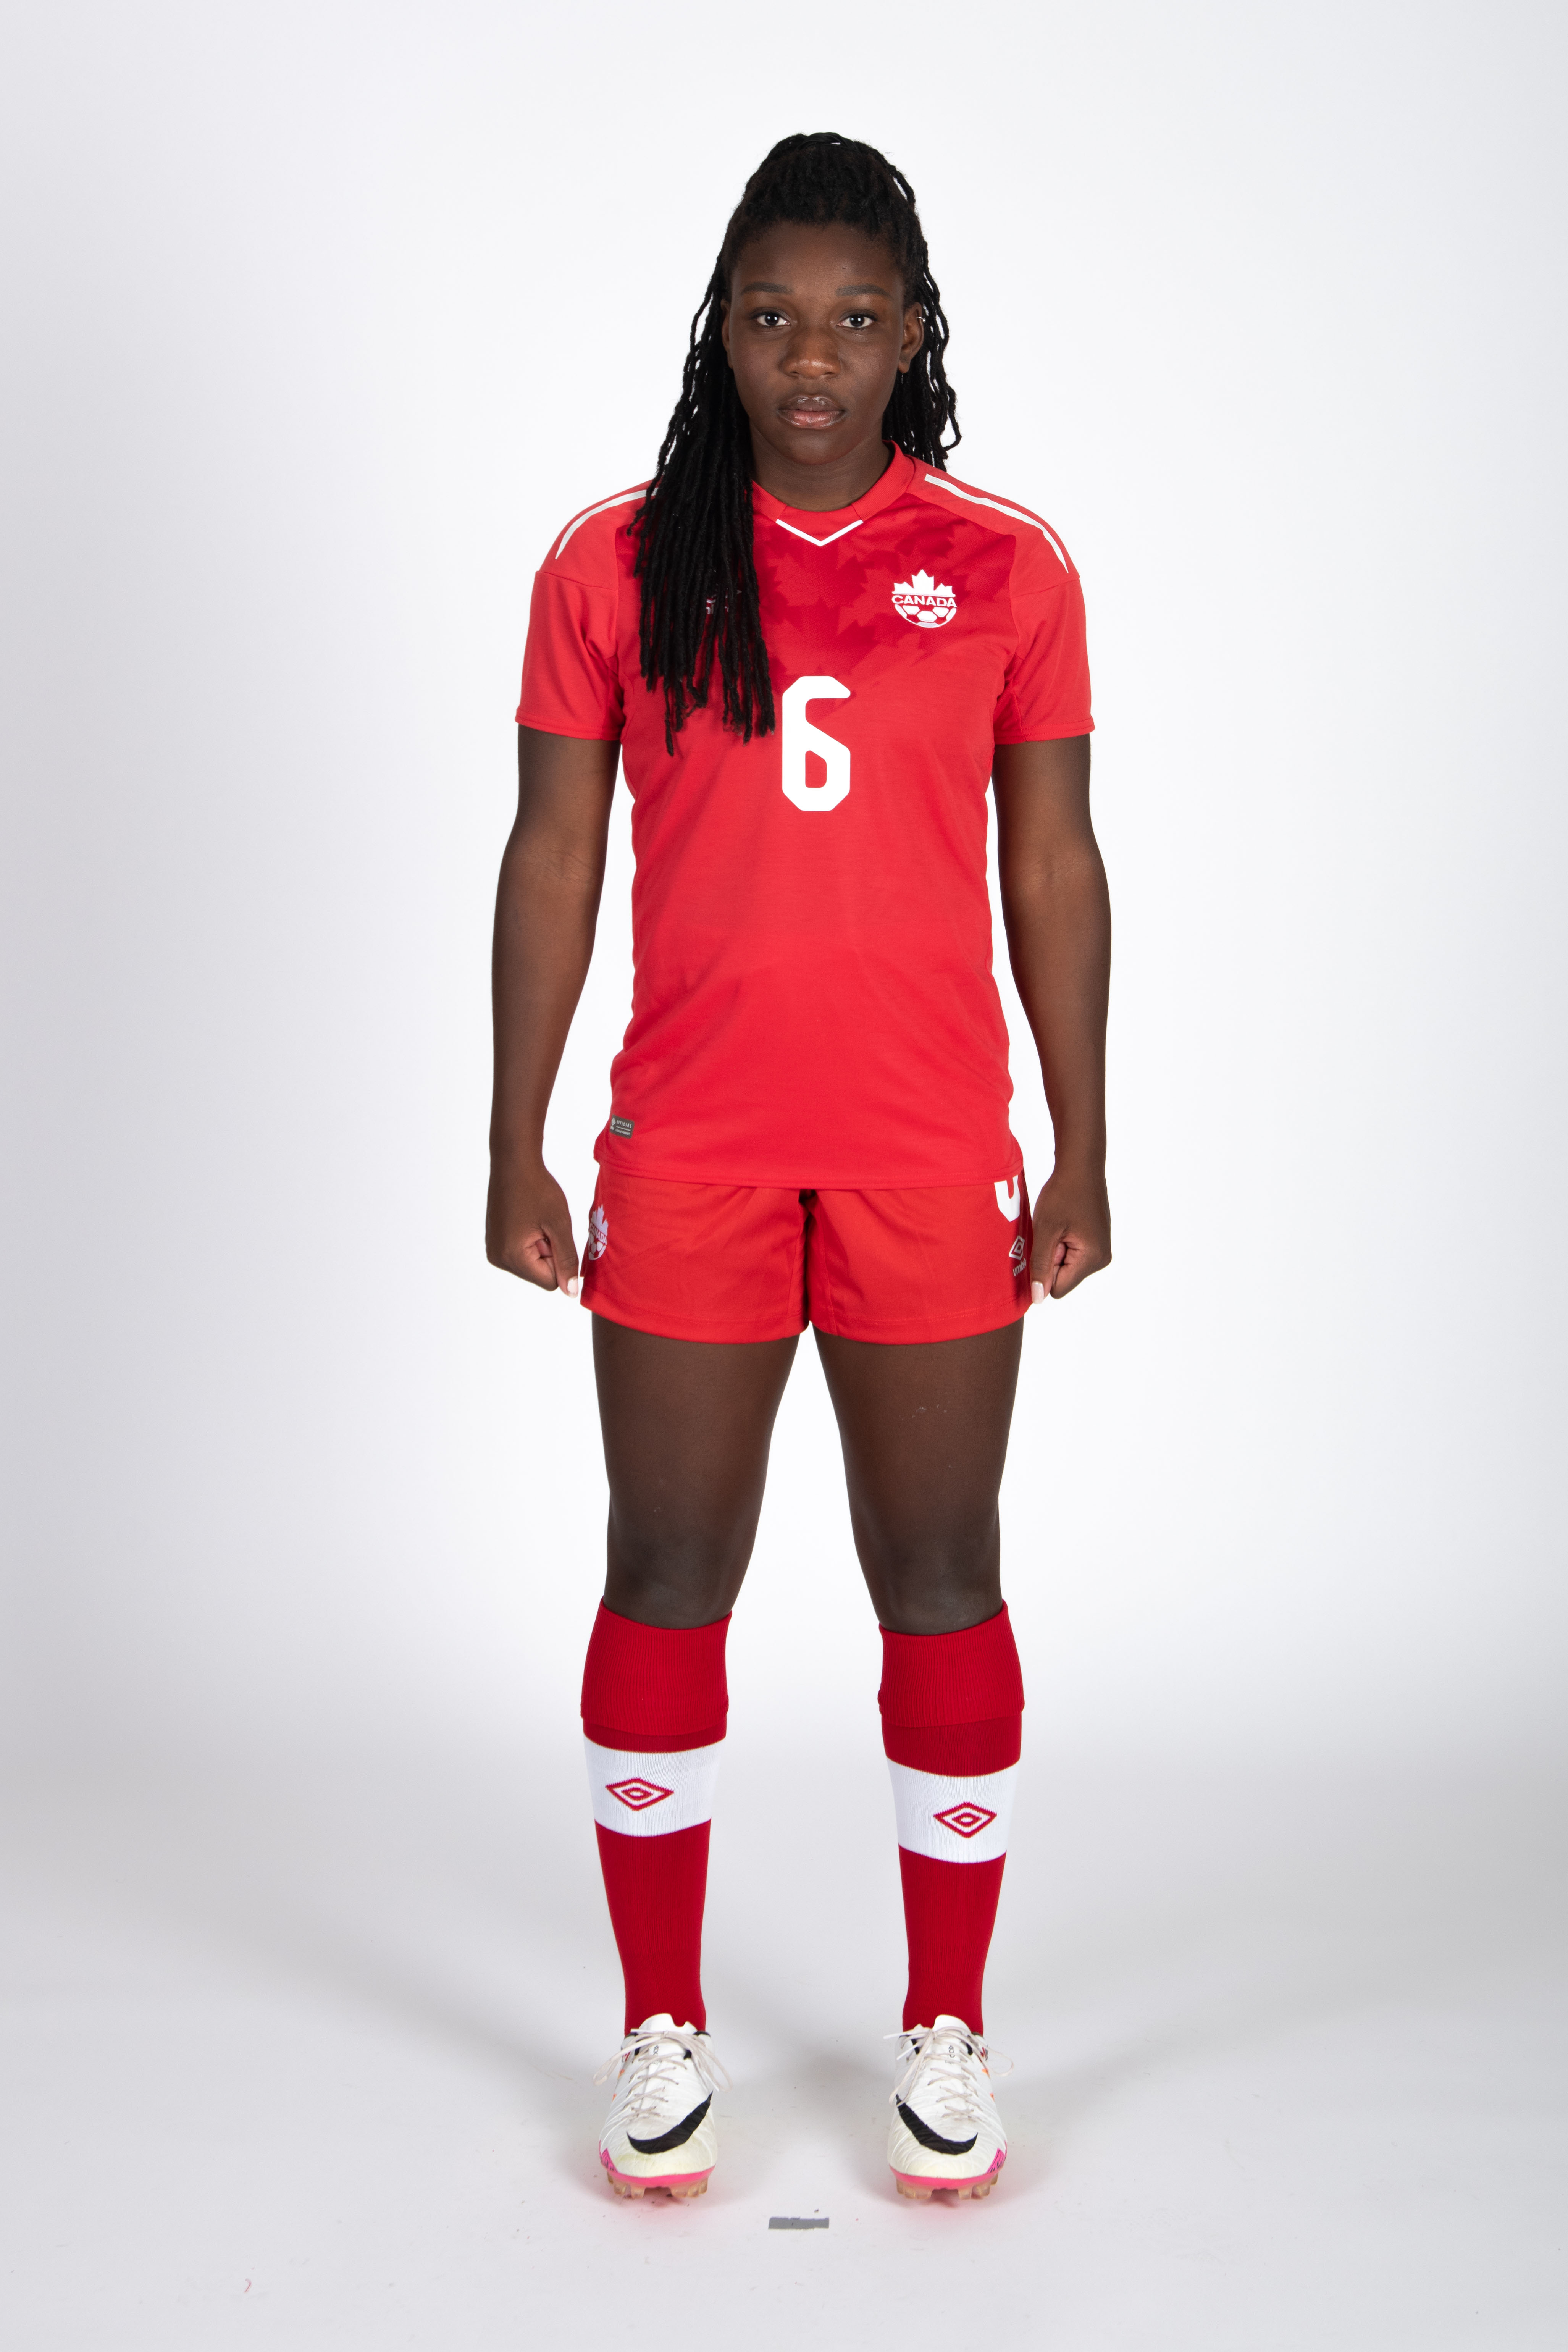 20180604_CANWNT_Rose_byBazyl09